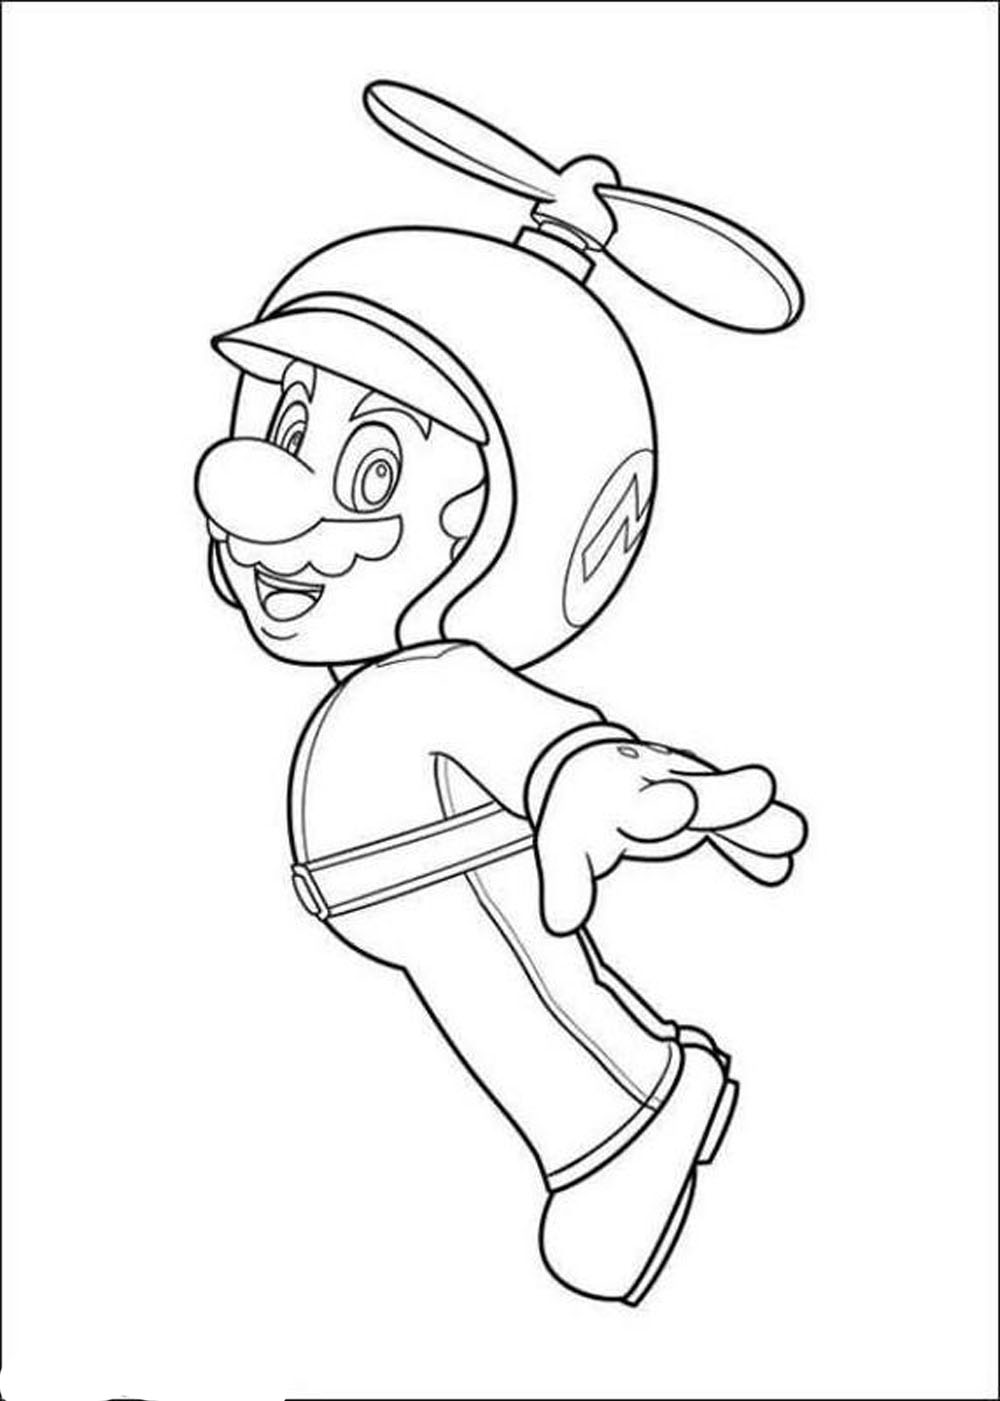 Print & Download - Mario Coloring Pages Themes